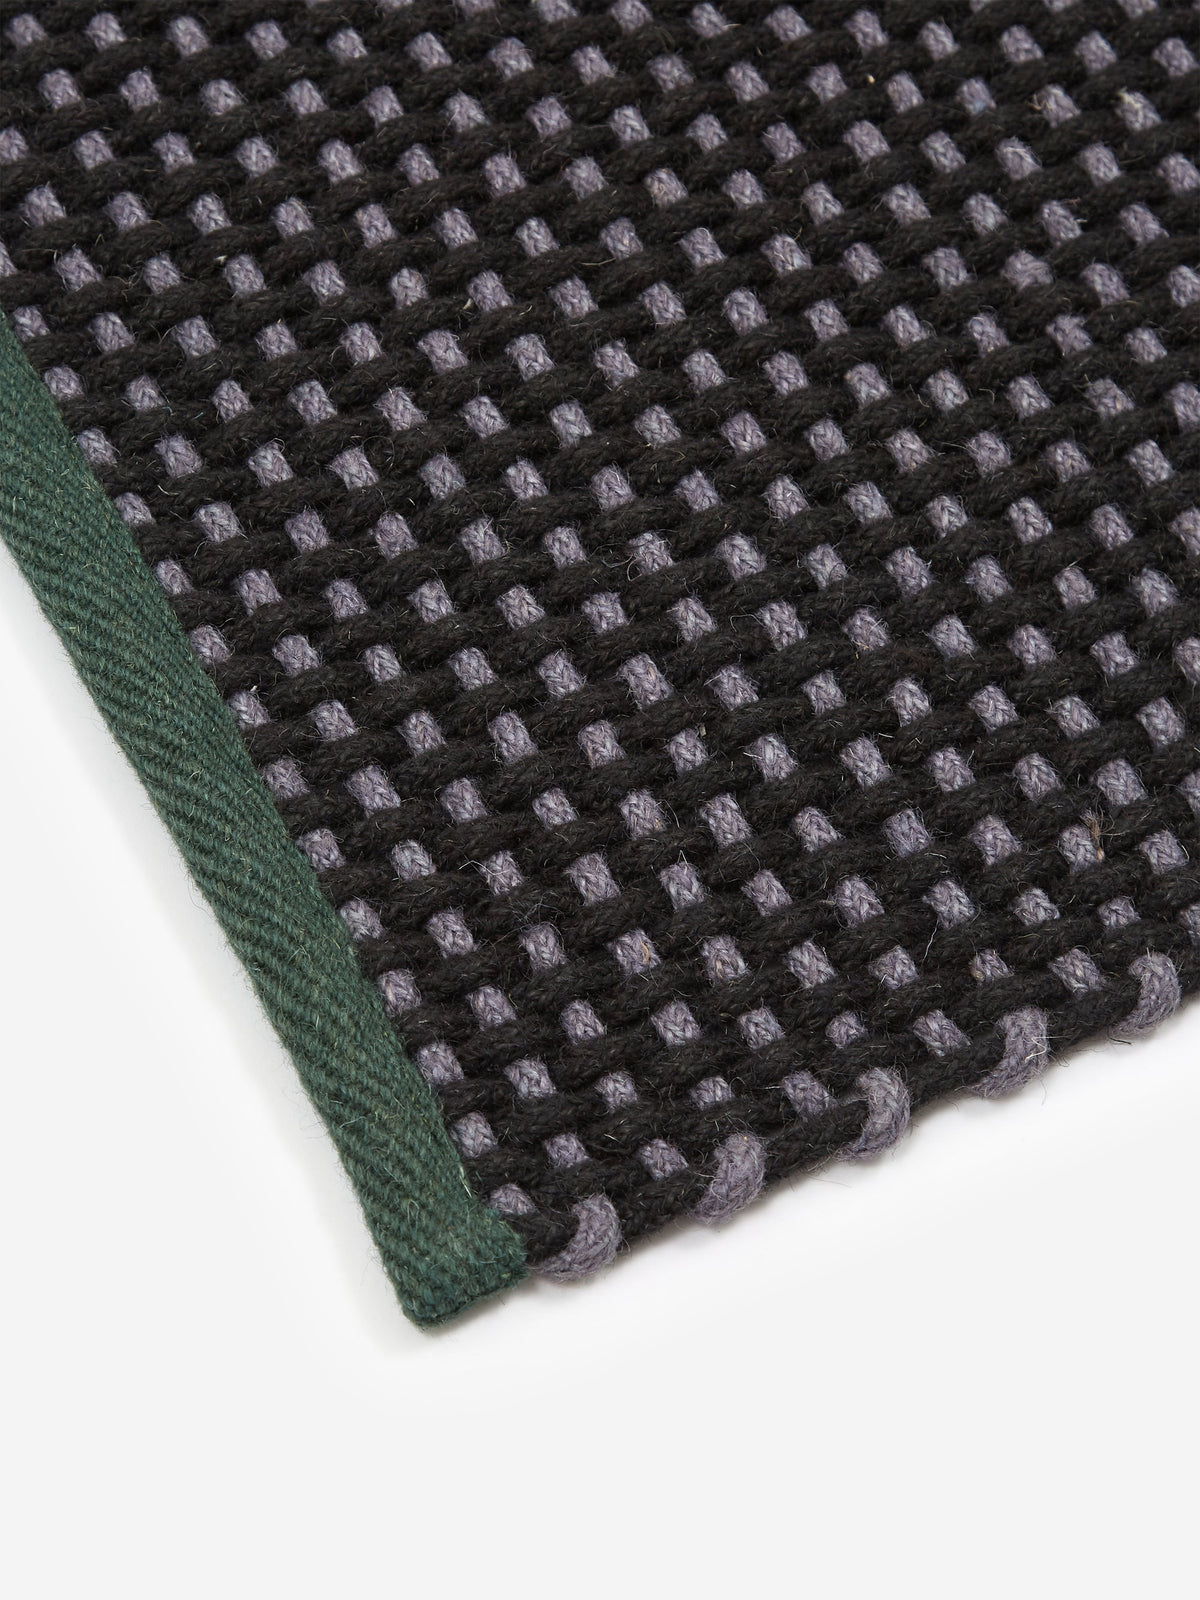 The newest HAY Door Mat - Green HAY is now available for purchase at a  great price